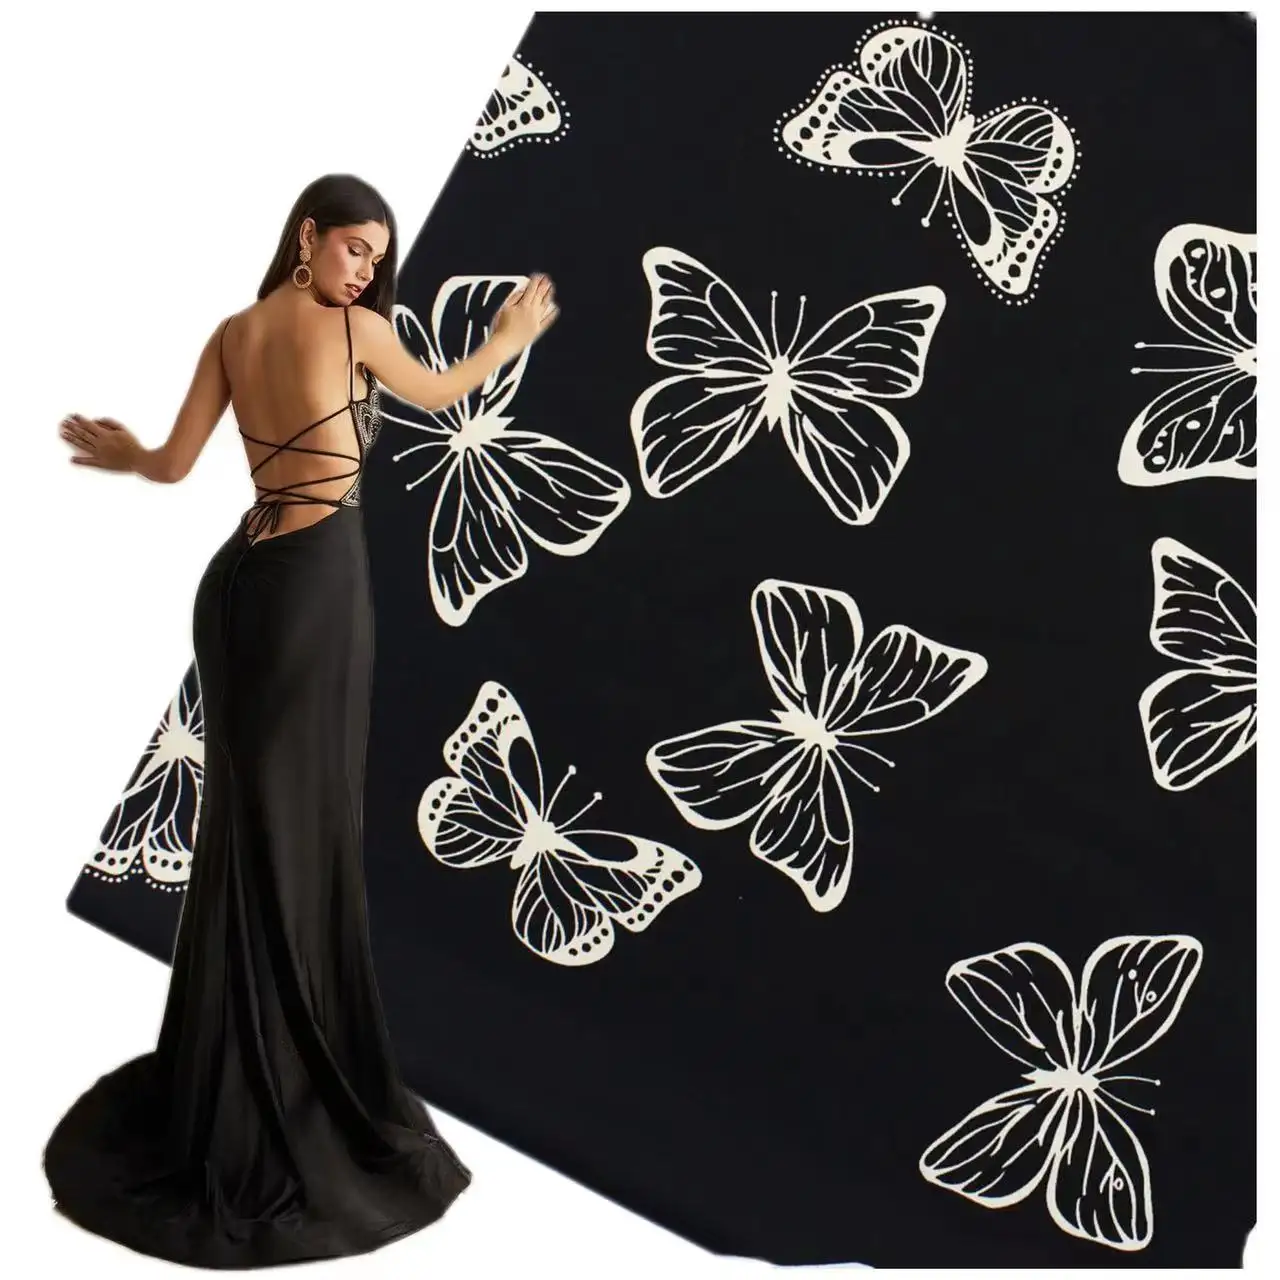 Evening gown dress elegant shinny butterfly pattern digital printed soft skin satin silk fabric for long gown